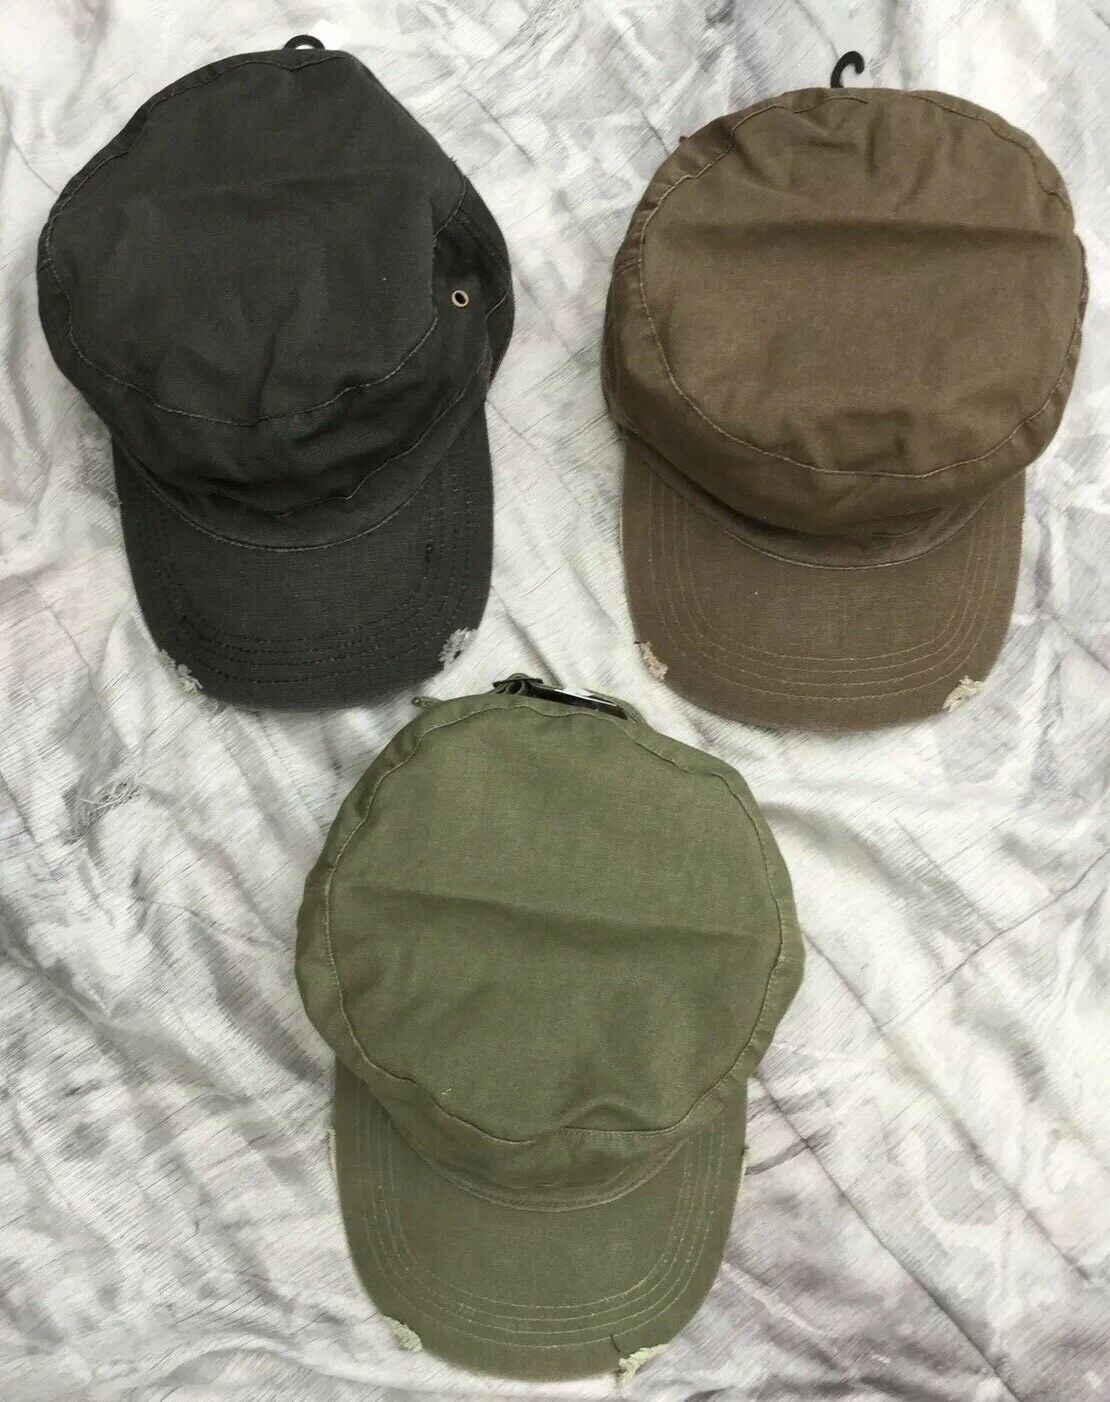 new PEAK CAPS CADET STYLE HATS IN 3 COLOURS IN distressed cotton.adjust sizing Wonkey Donkey Bazaar